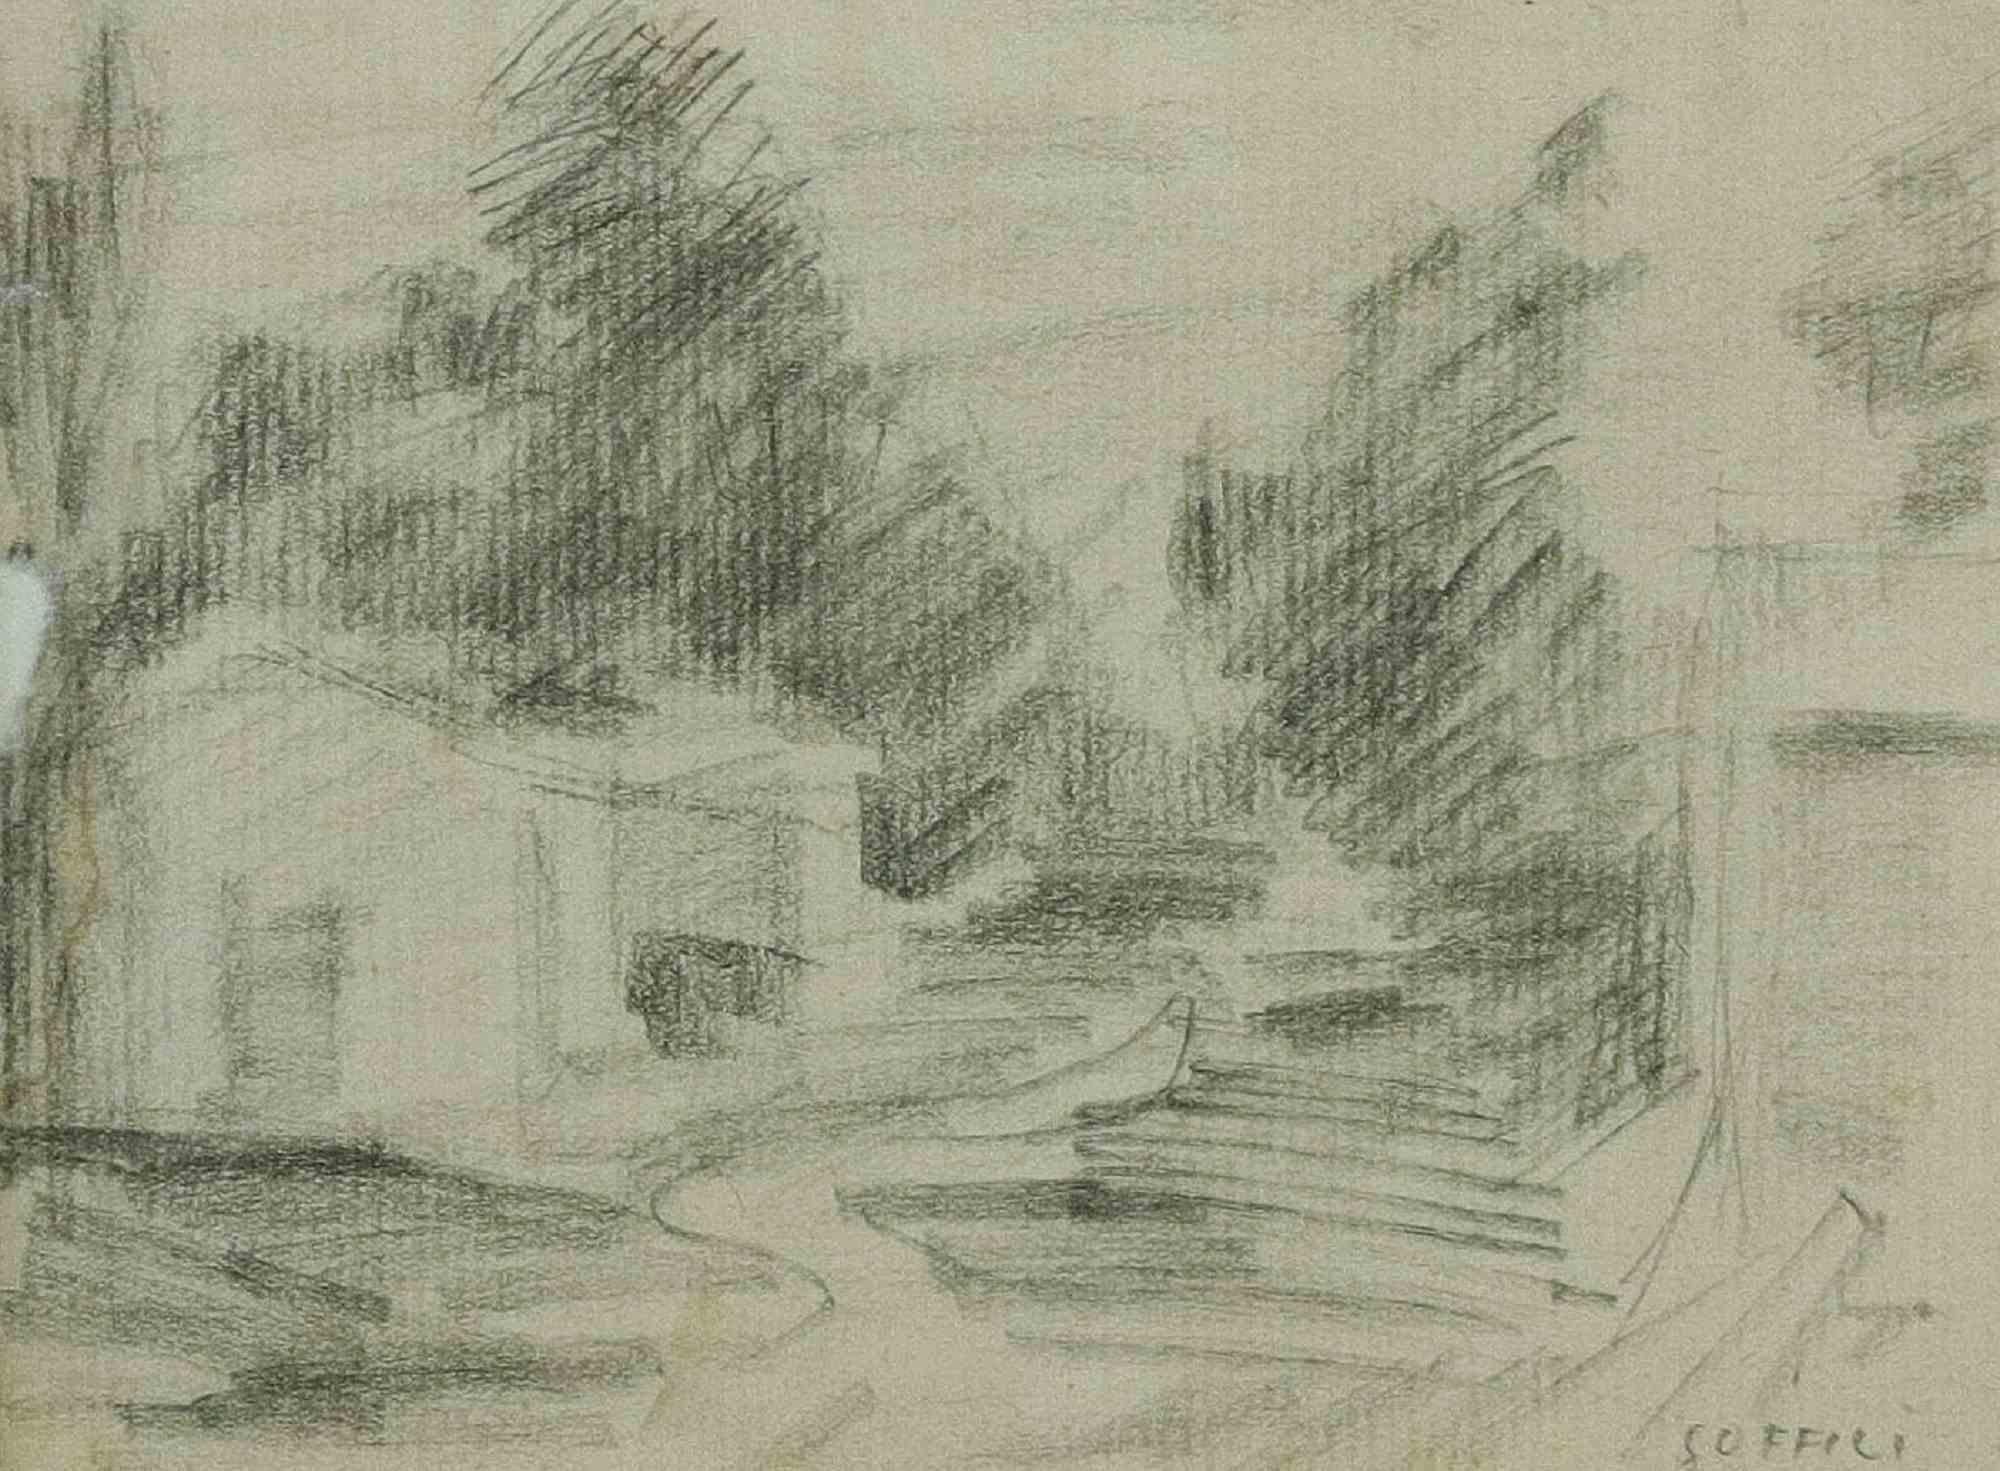 Landscape -  Drawing by Ardengo Soffici - 1932